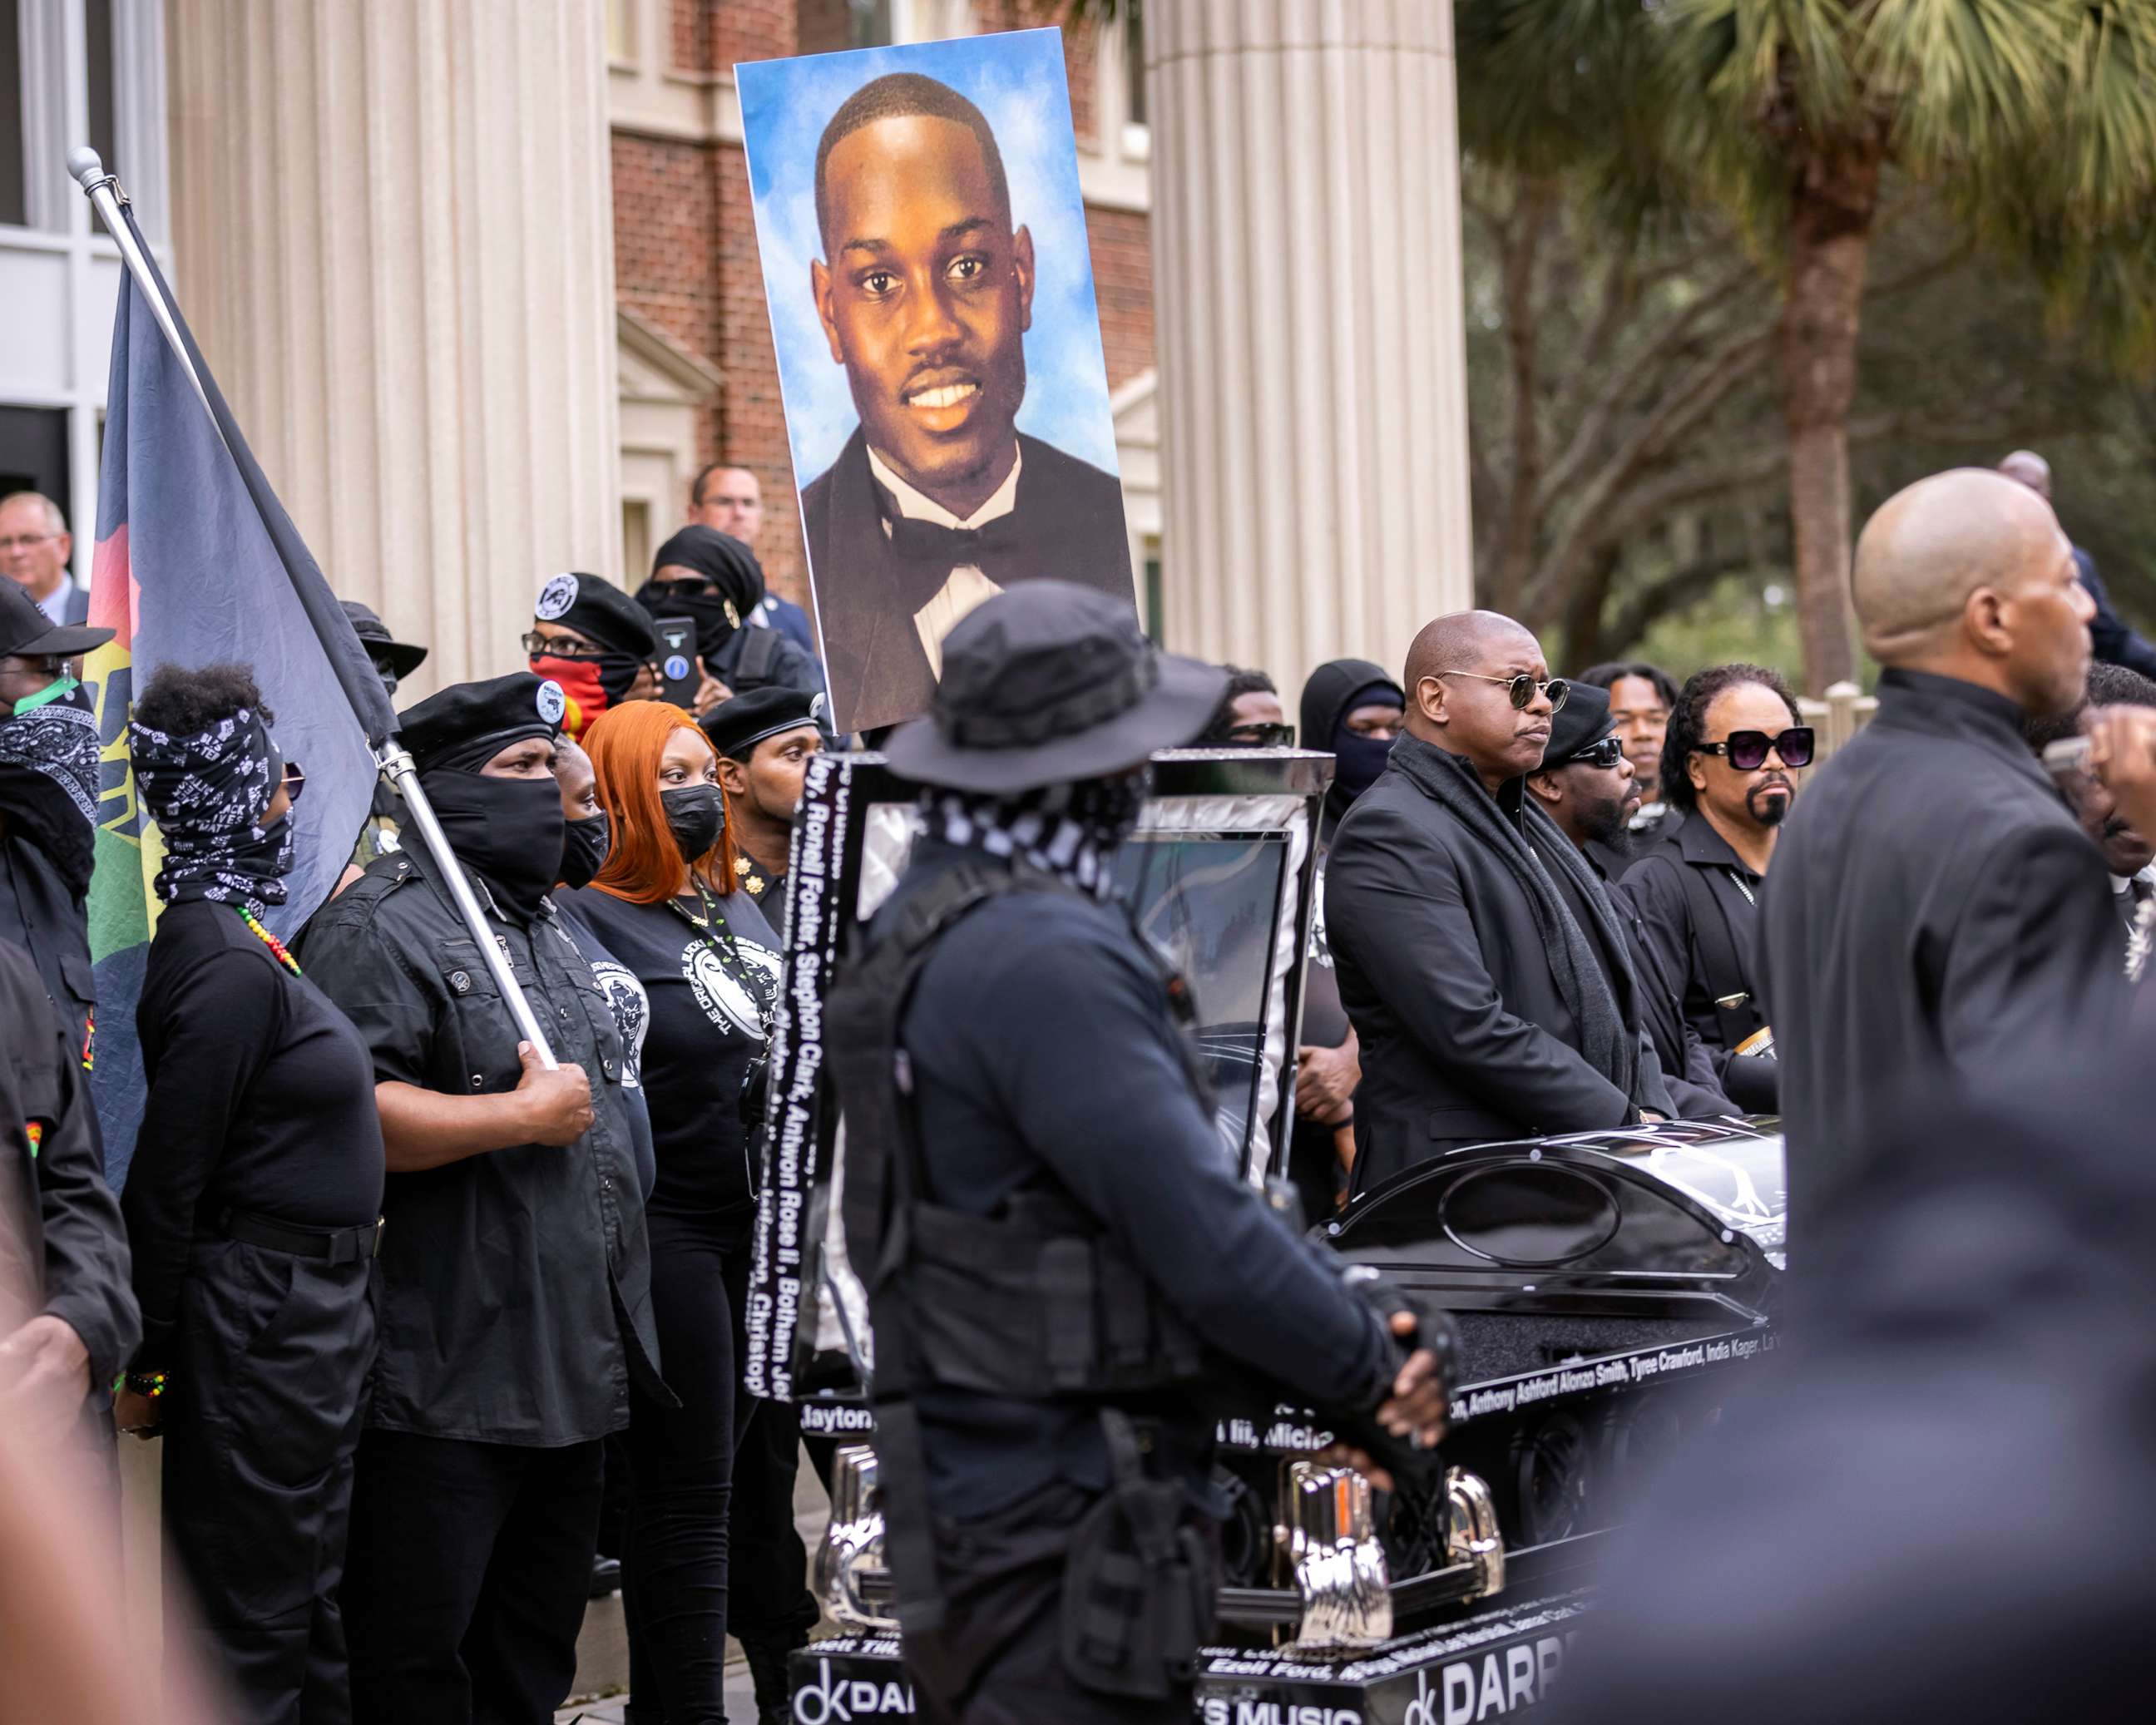 PHOTO: Dozens of Black Lives Matter and Black Panther gather outside the Glynn County Courthouse where the trial of Travis McMichael, his father, Gregory McMichael, and William "Roddie" Bryan is being held, Nov. 22, 2021, in Brunswick, Ga.